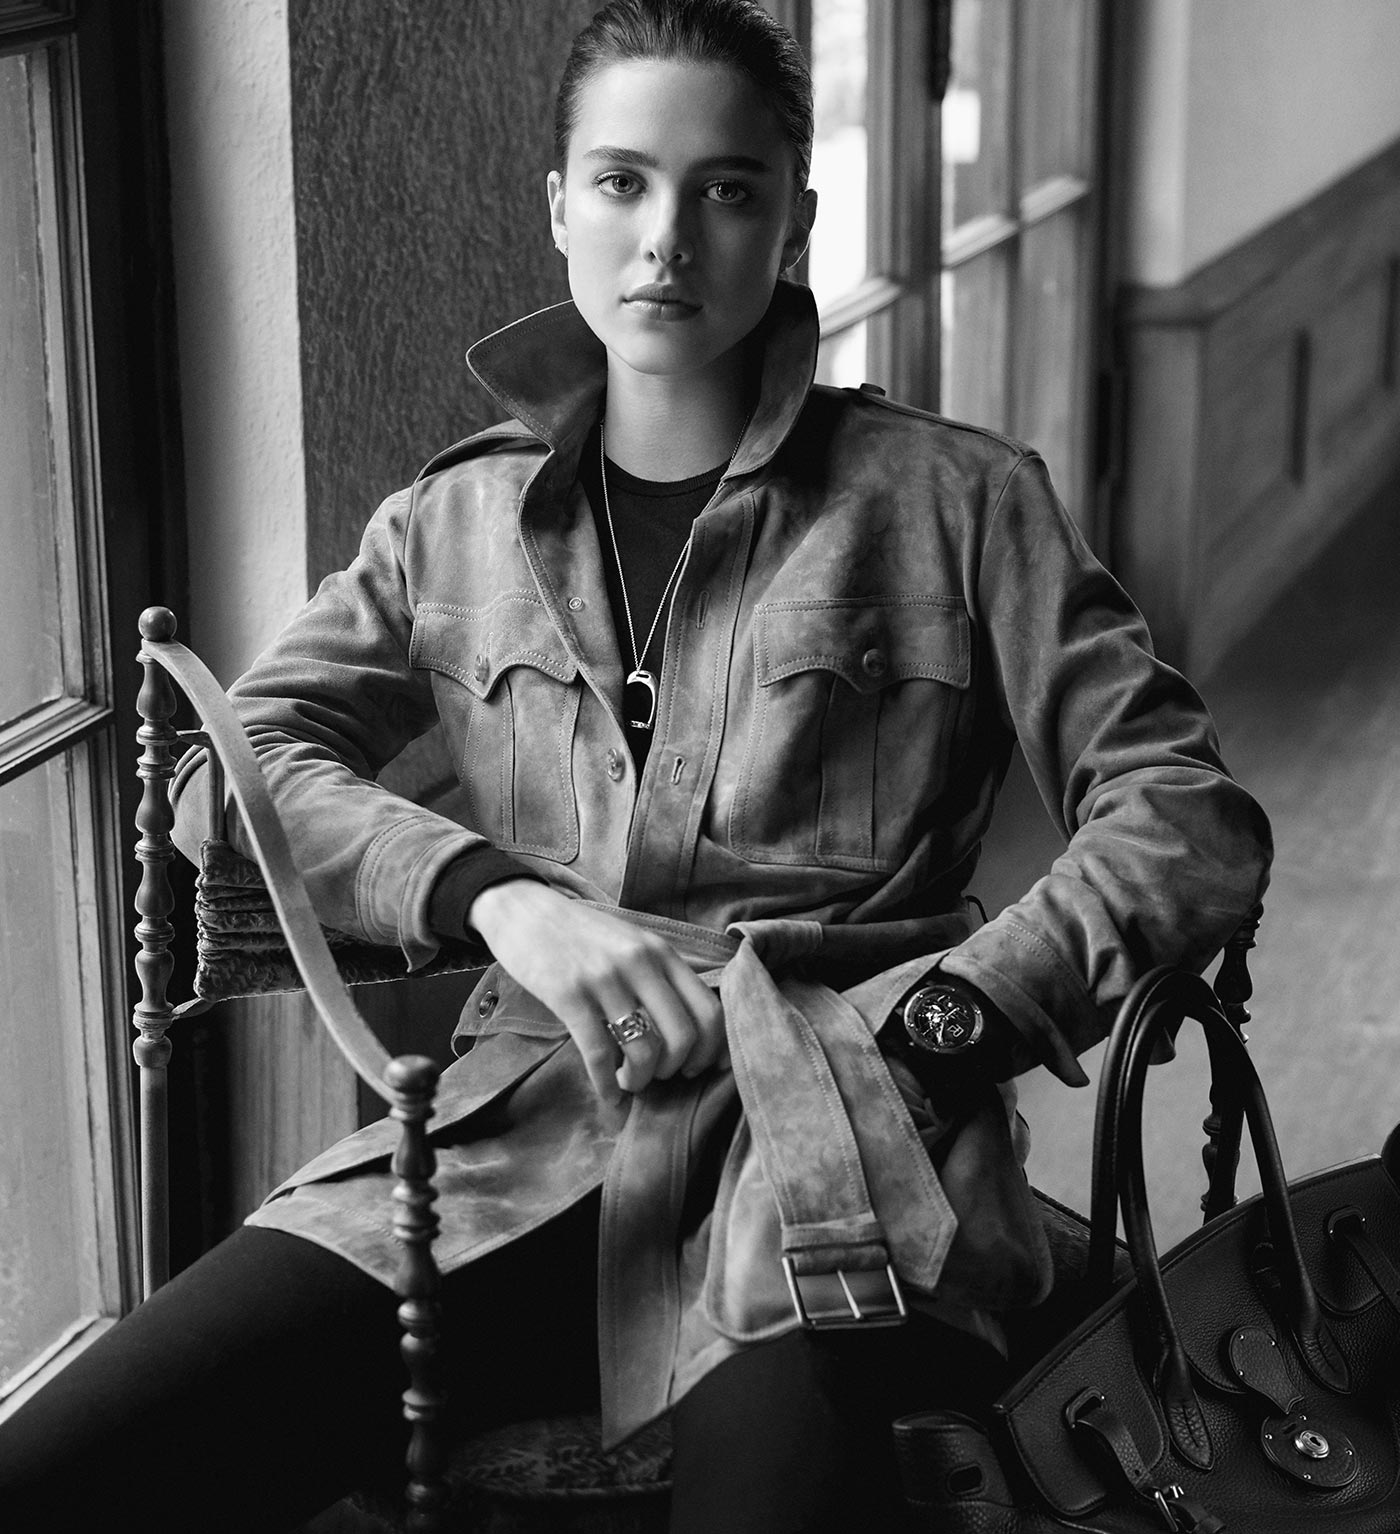 The RL Safari Jacket, worn by Margaret Qualley. Photographed by Steven Meisel